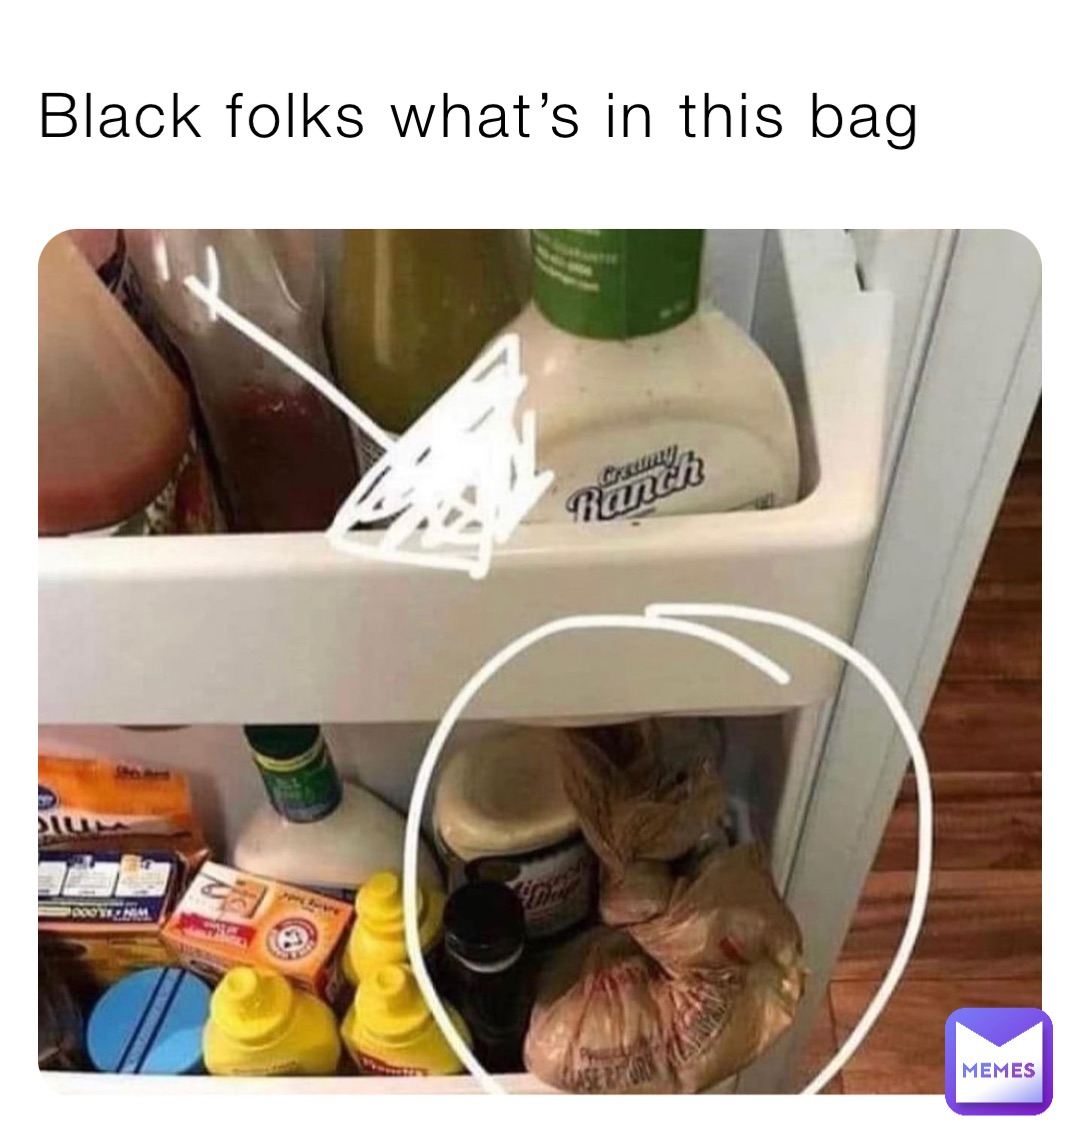 Black folks what’s in this bag